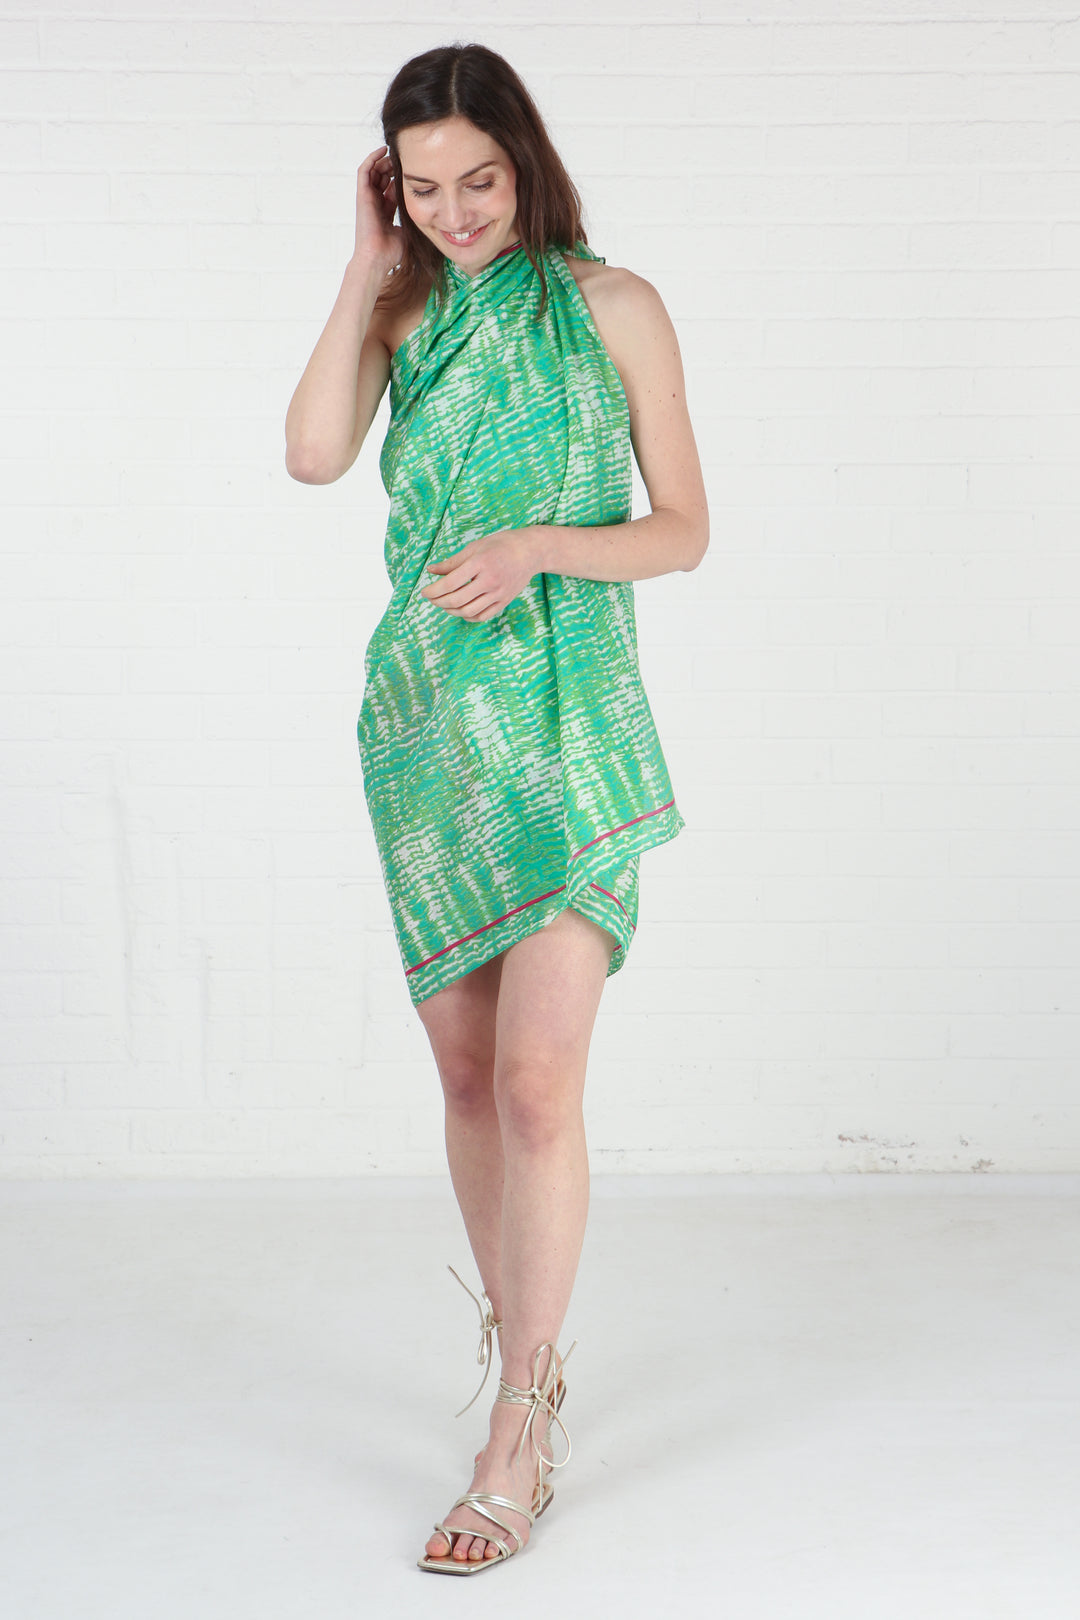 model wearing this green tie dye cotton scarf as a beach coverup dress